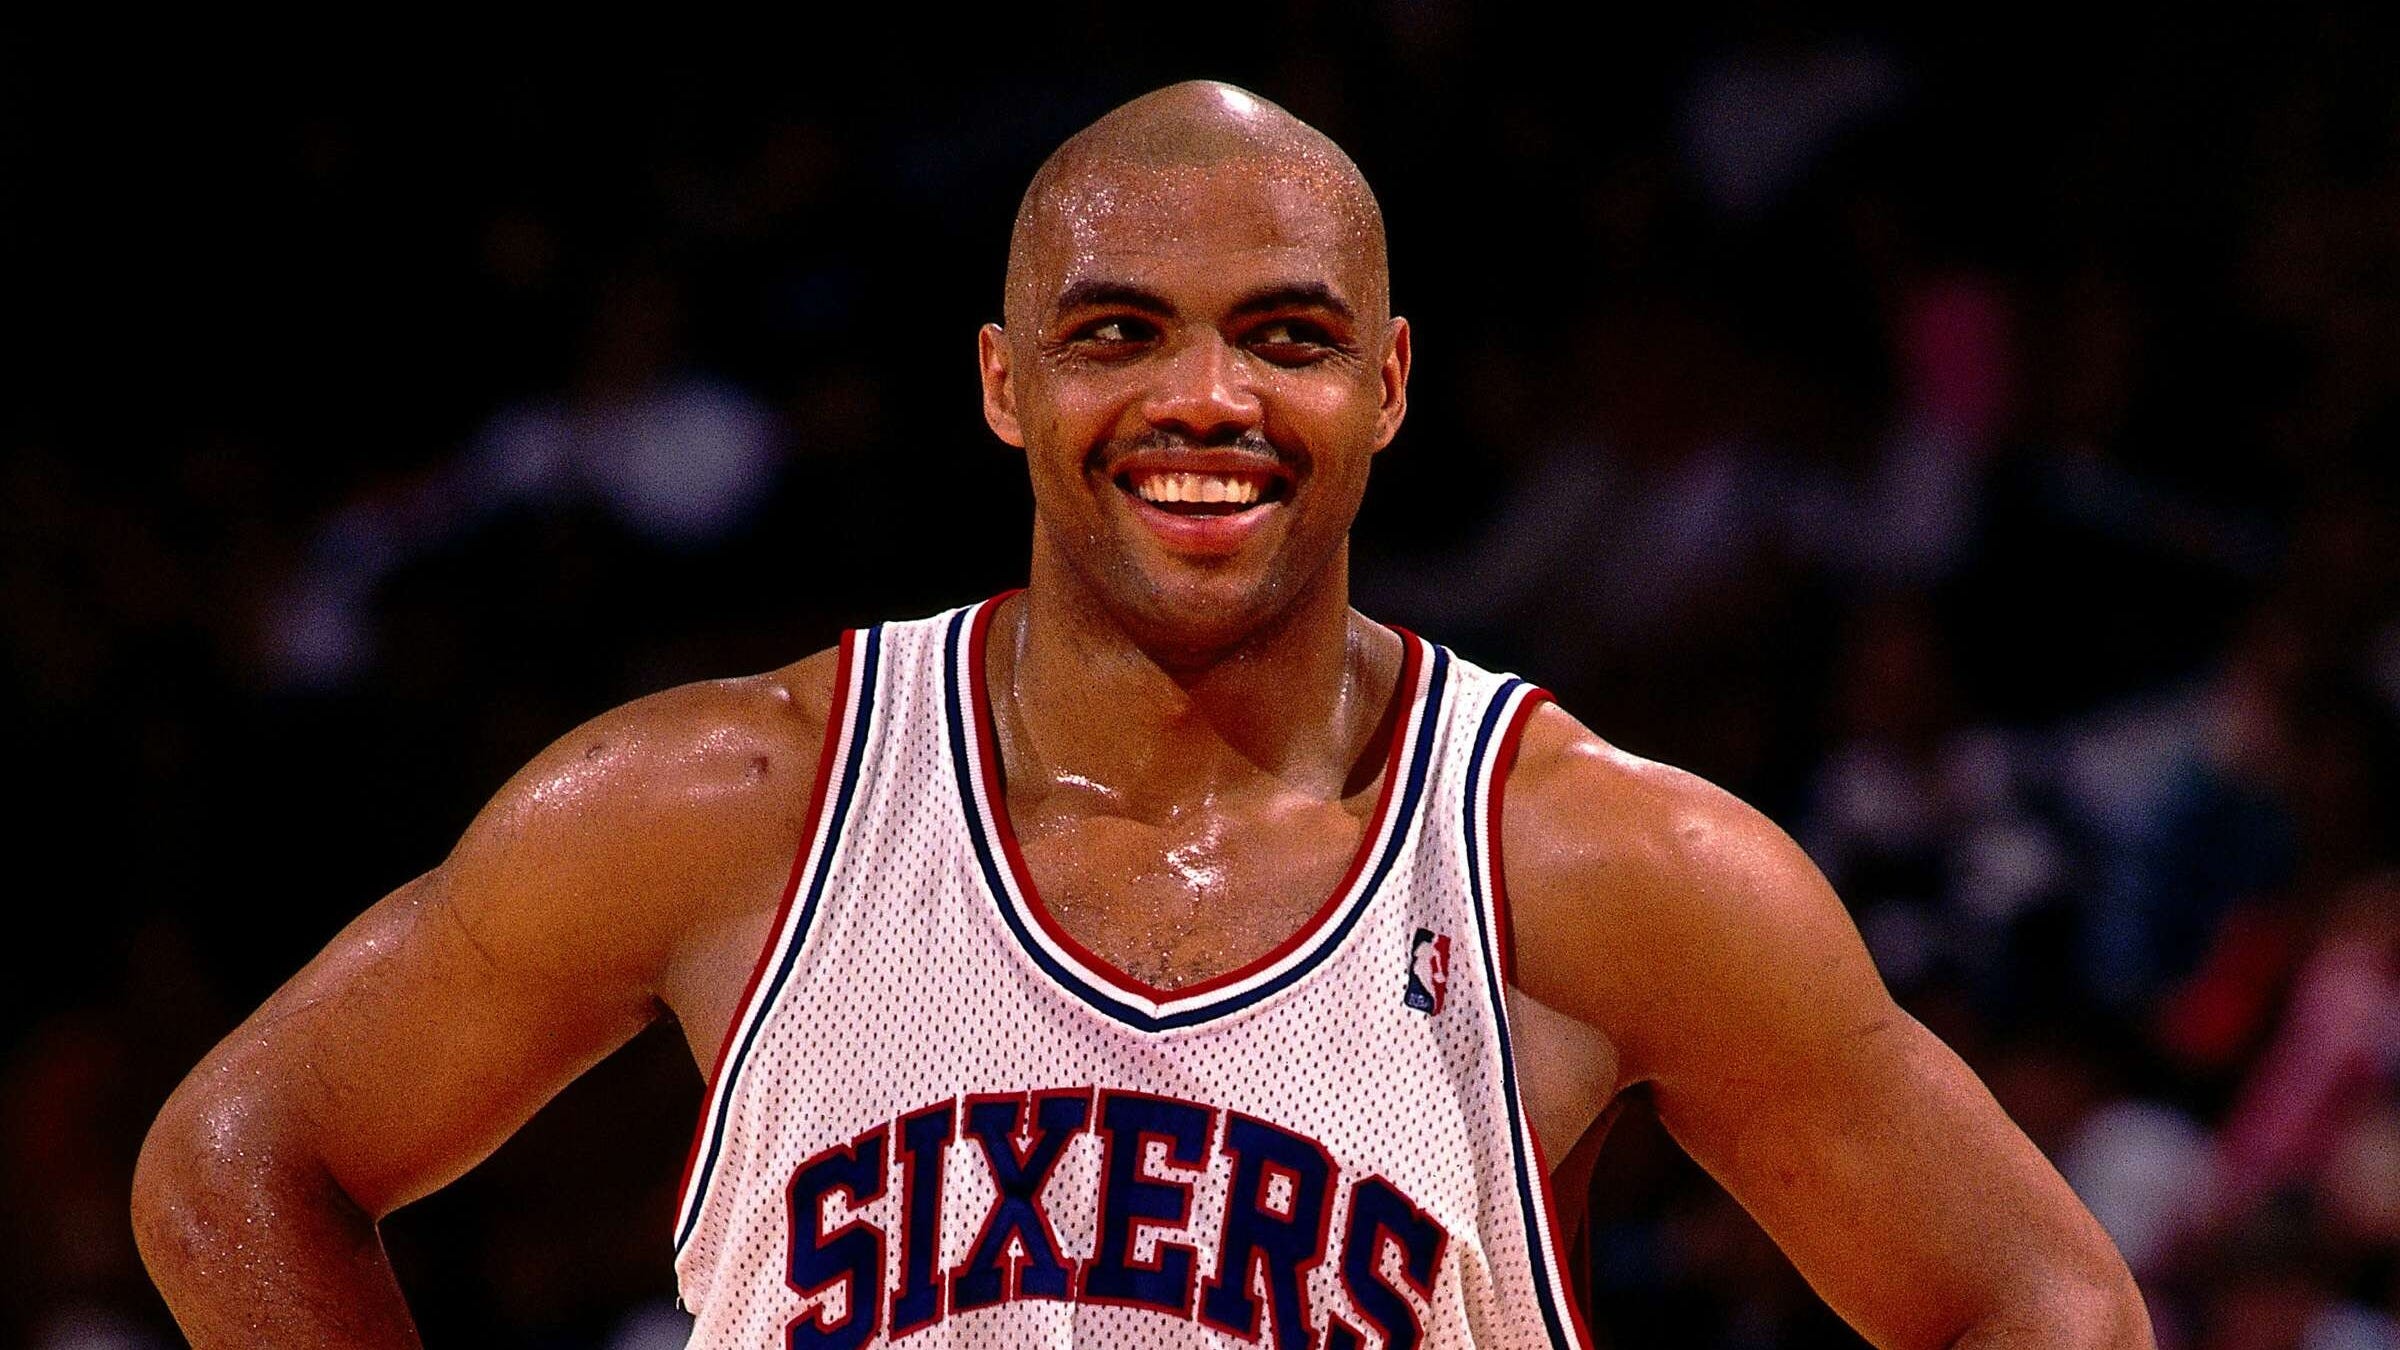 Charles Barkley  Biography, Stats, Height, Teams, & Facts